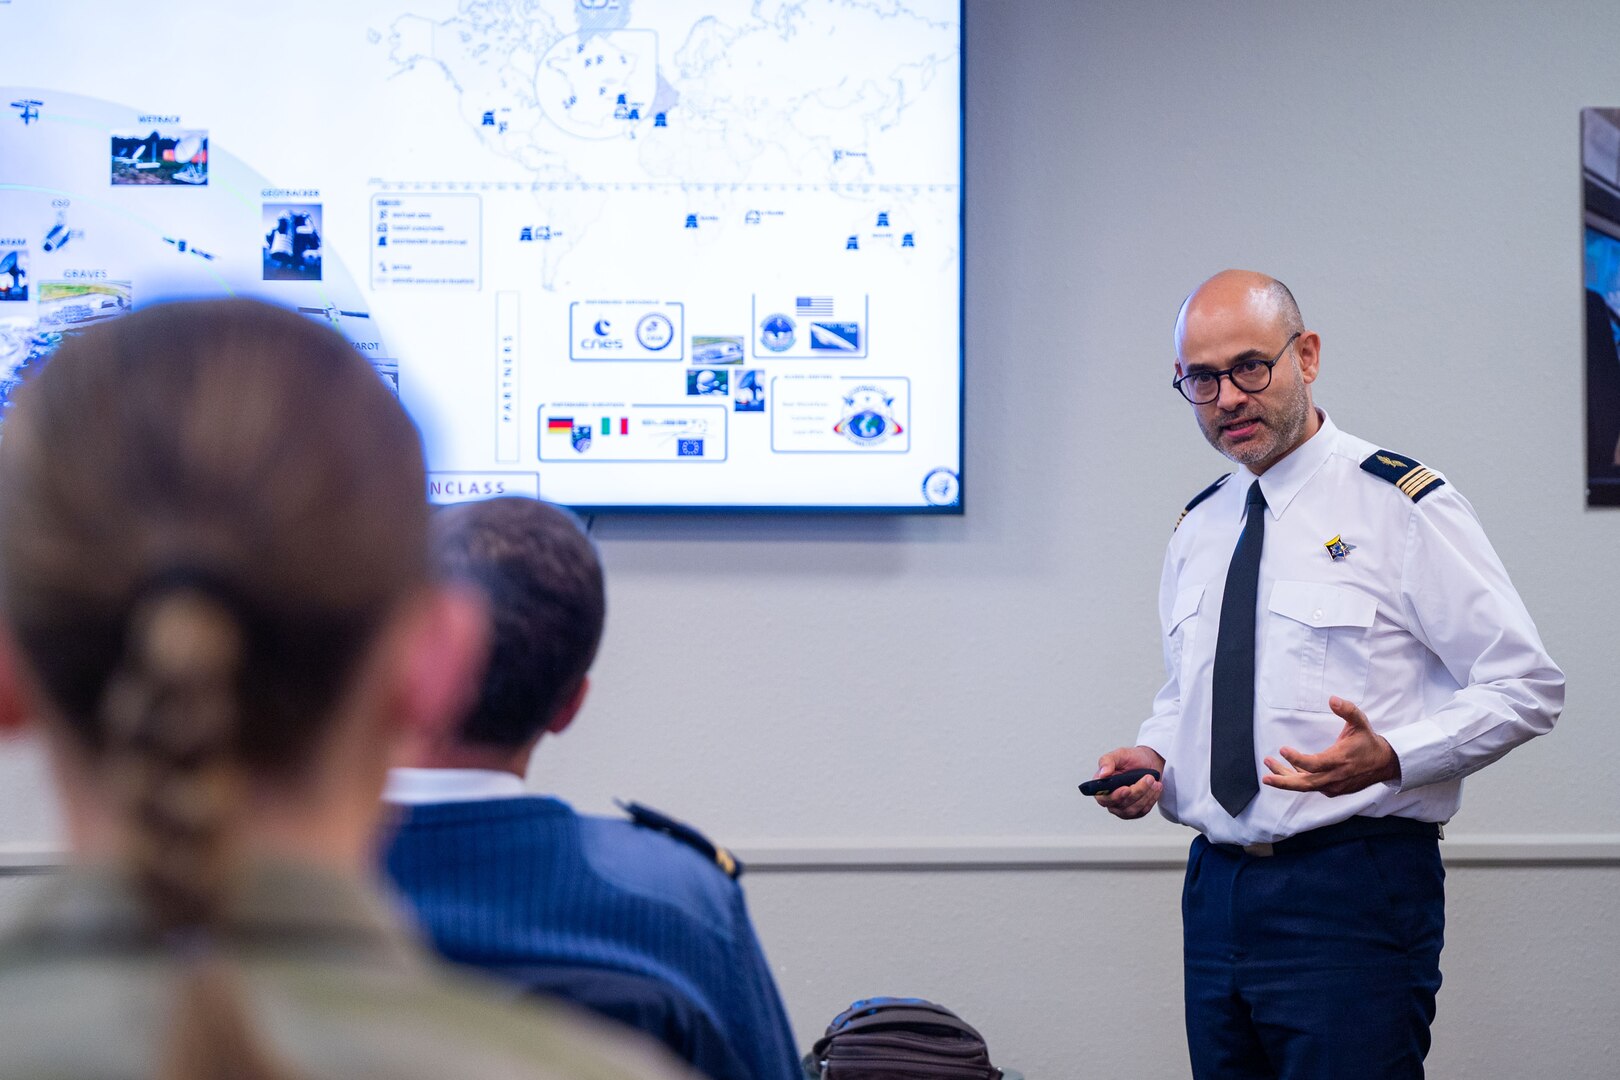 A French space operator from the Operational Center for Military Surveillance of Space Objects (COSMOS) instructs about the COSMOS organization structure and mission set during an Operator Exchange event hosted by the 18th Space Defense Squadron (18 SDS) at Vandenberg Space Force Base, Calif., Oct. 5, 2022. The 4-day event aimed to advance global space domain awareness between the two groups by exchanging common practices, spotlighting mission capabilities, and explaining methodologies of their respective programs. (U.S. Space Force photo by Tech. Sgt. Luke Kitterman)